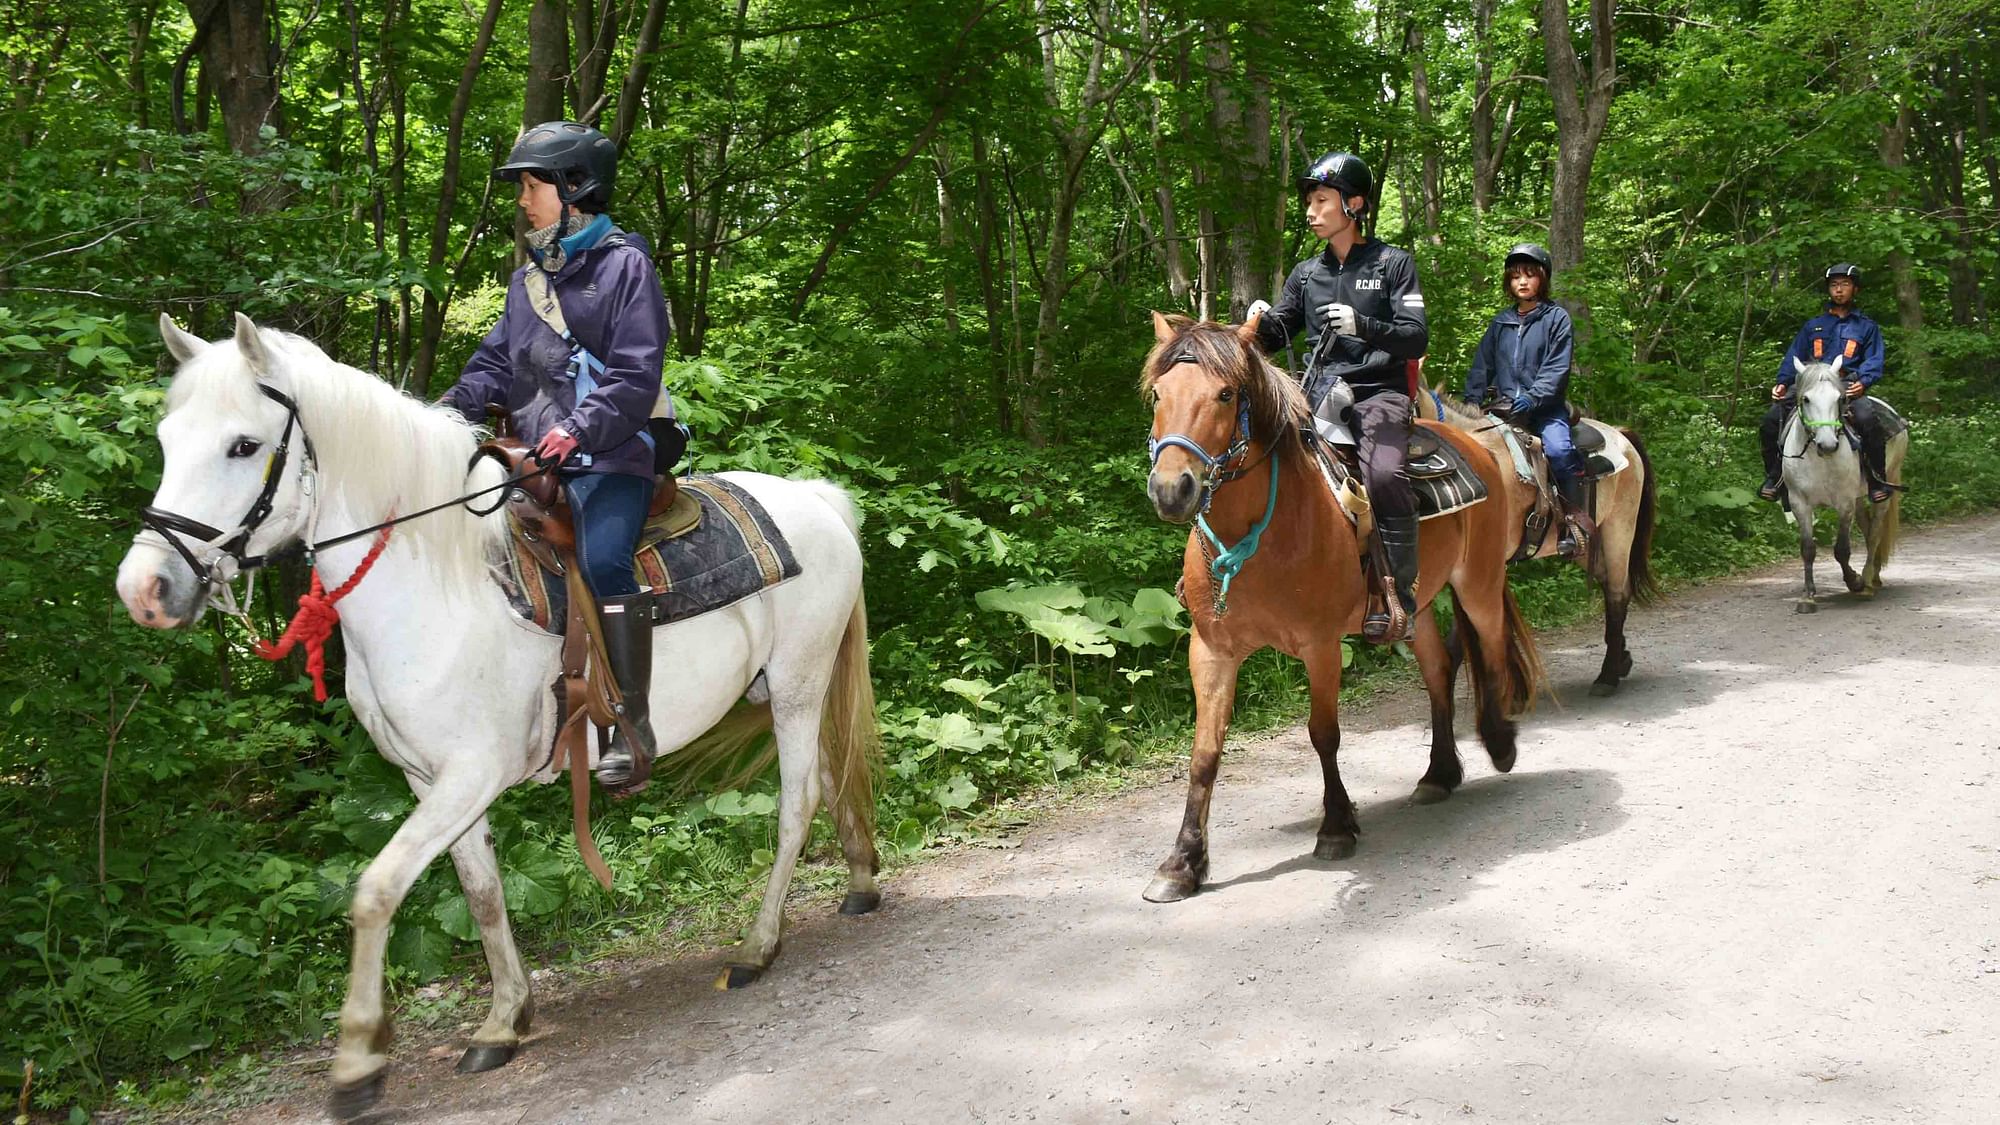 Rescuers on horses search for the missing 7-year-old boy in a Japanese forest on Hokkaido, Japan’s northernmost island. (Photo: AP)